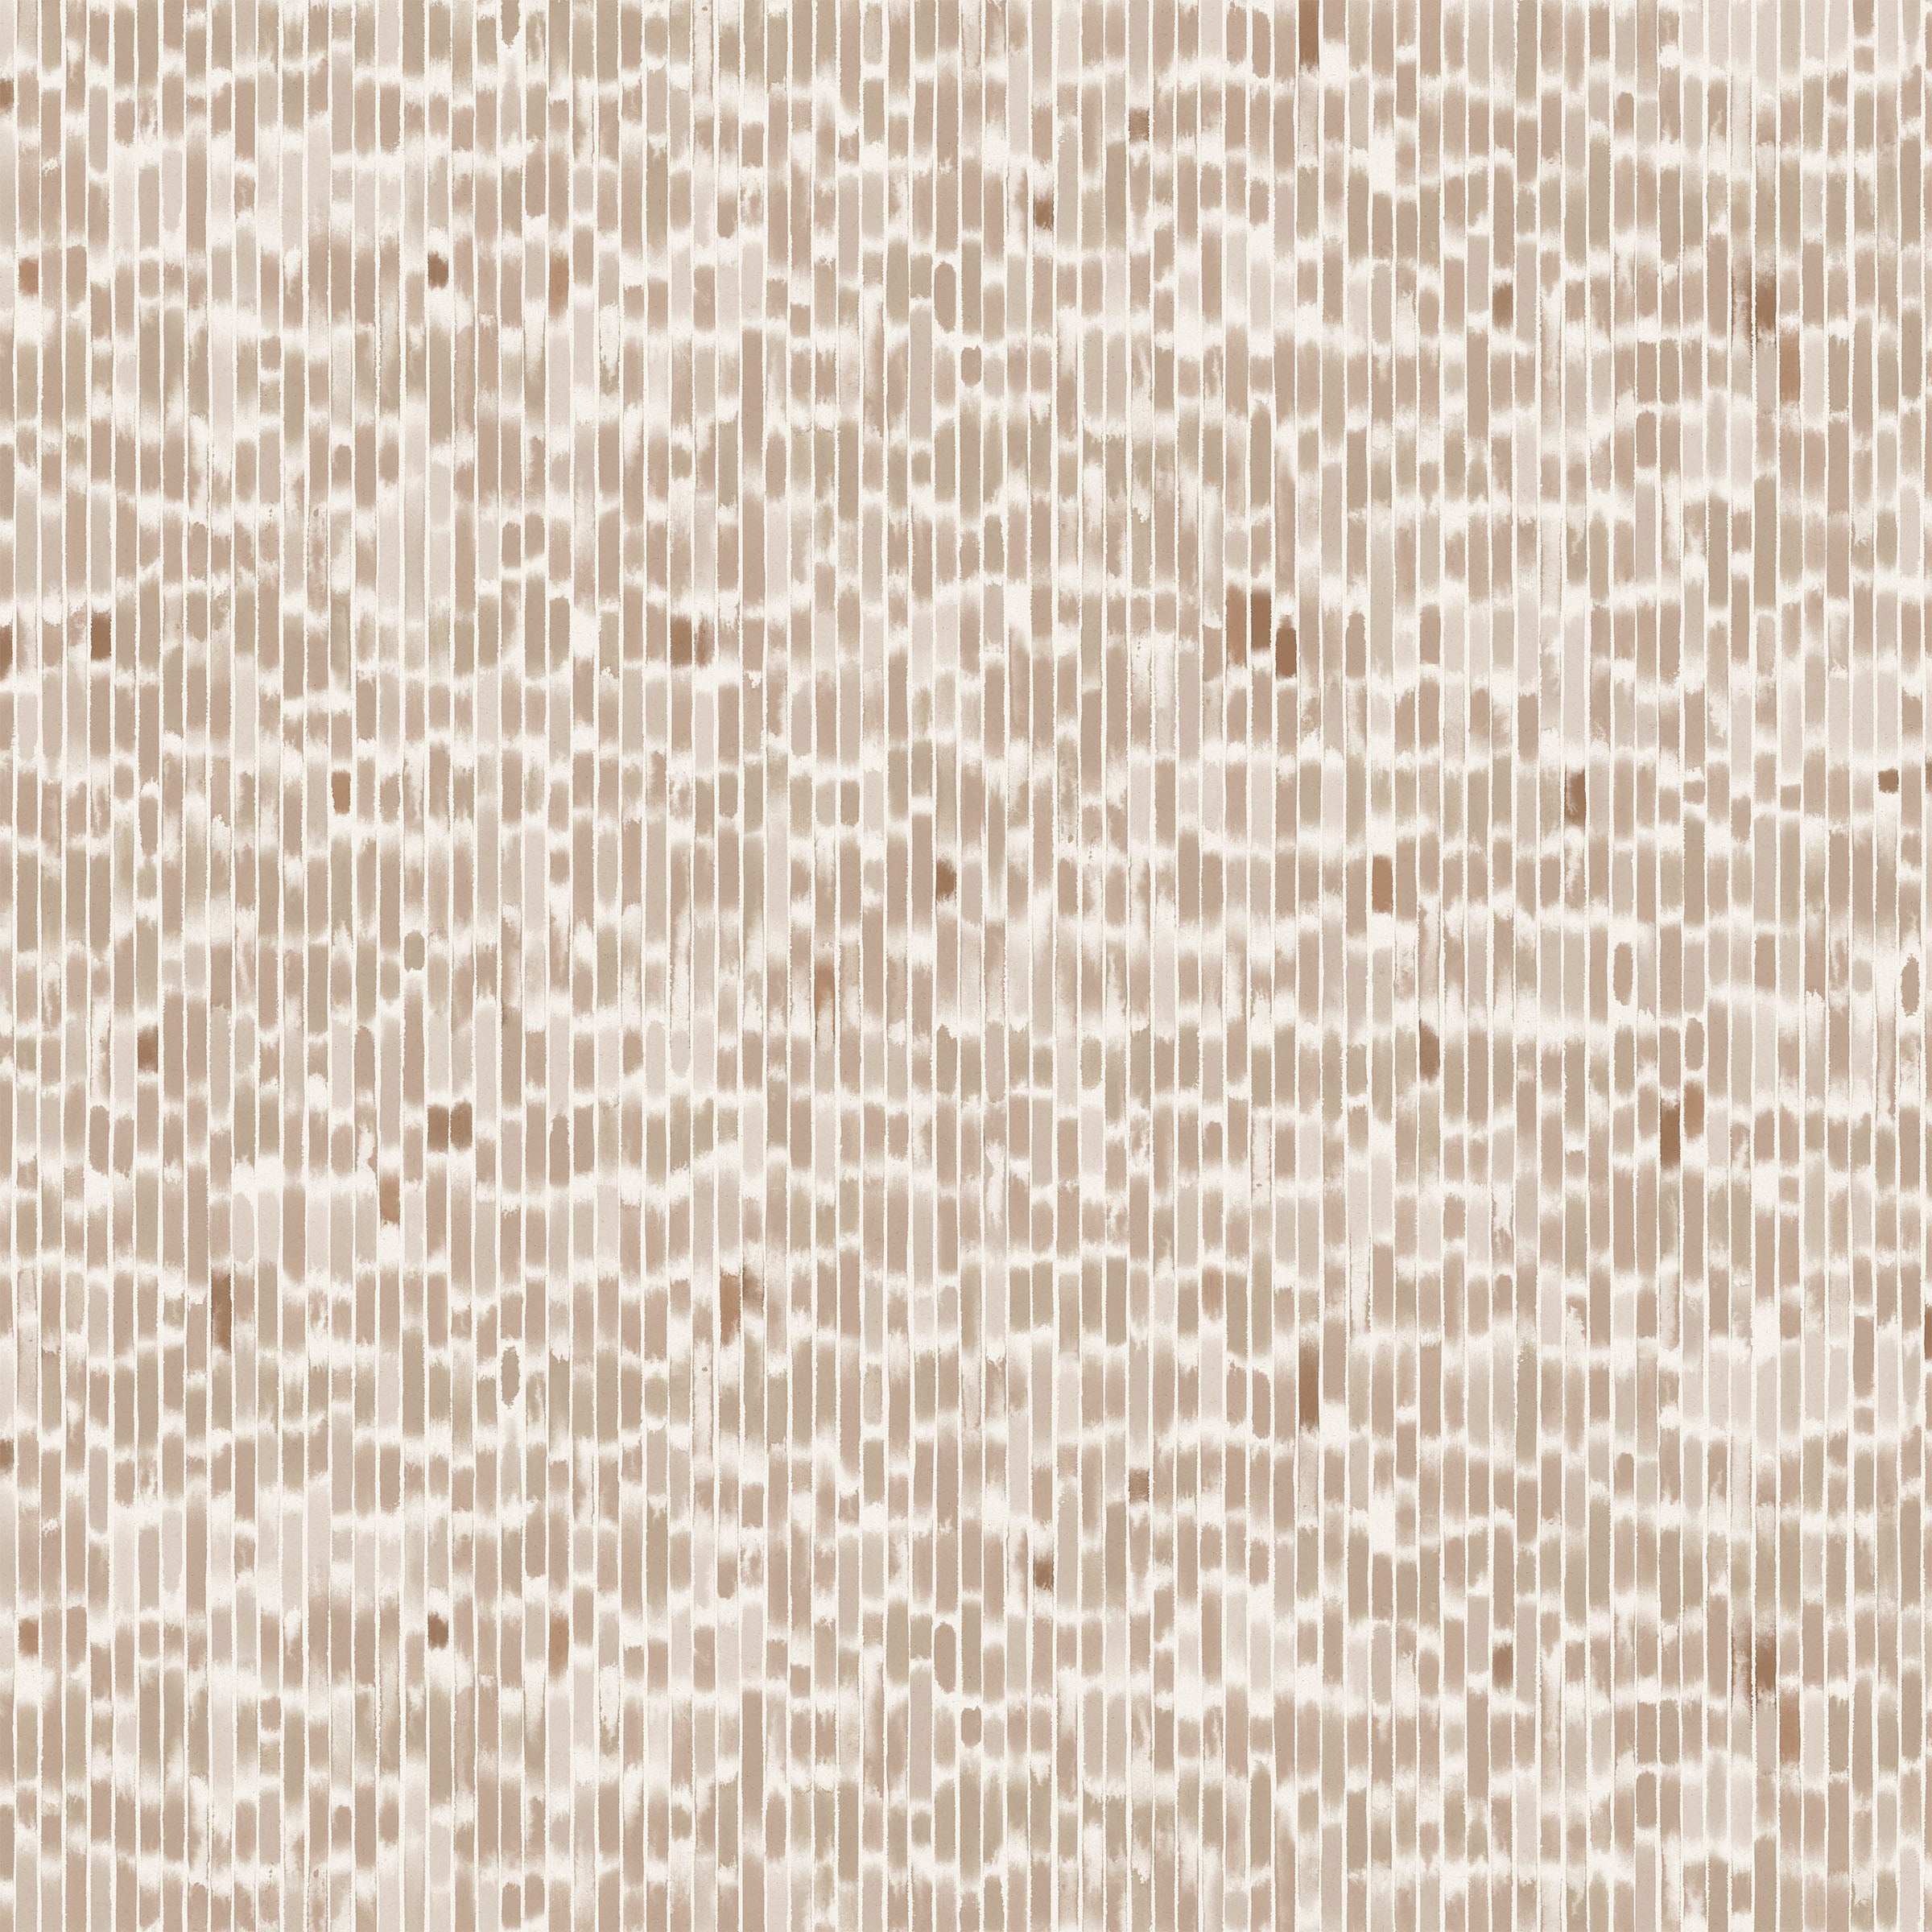 Detail of fabric in a linear check pattern in shades of tan and brown on a white field.